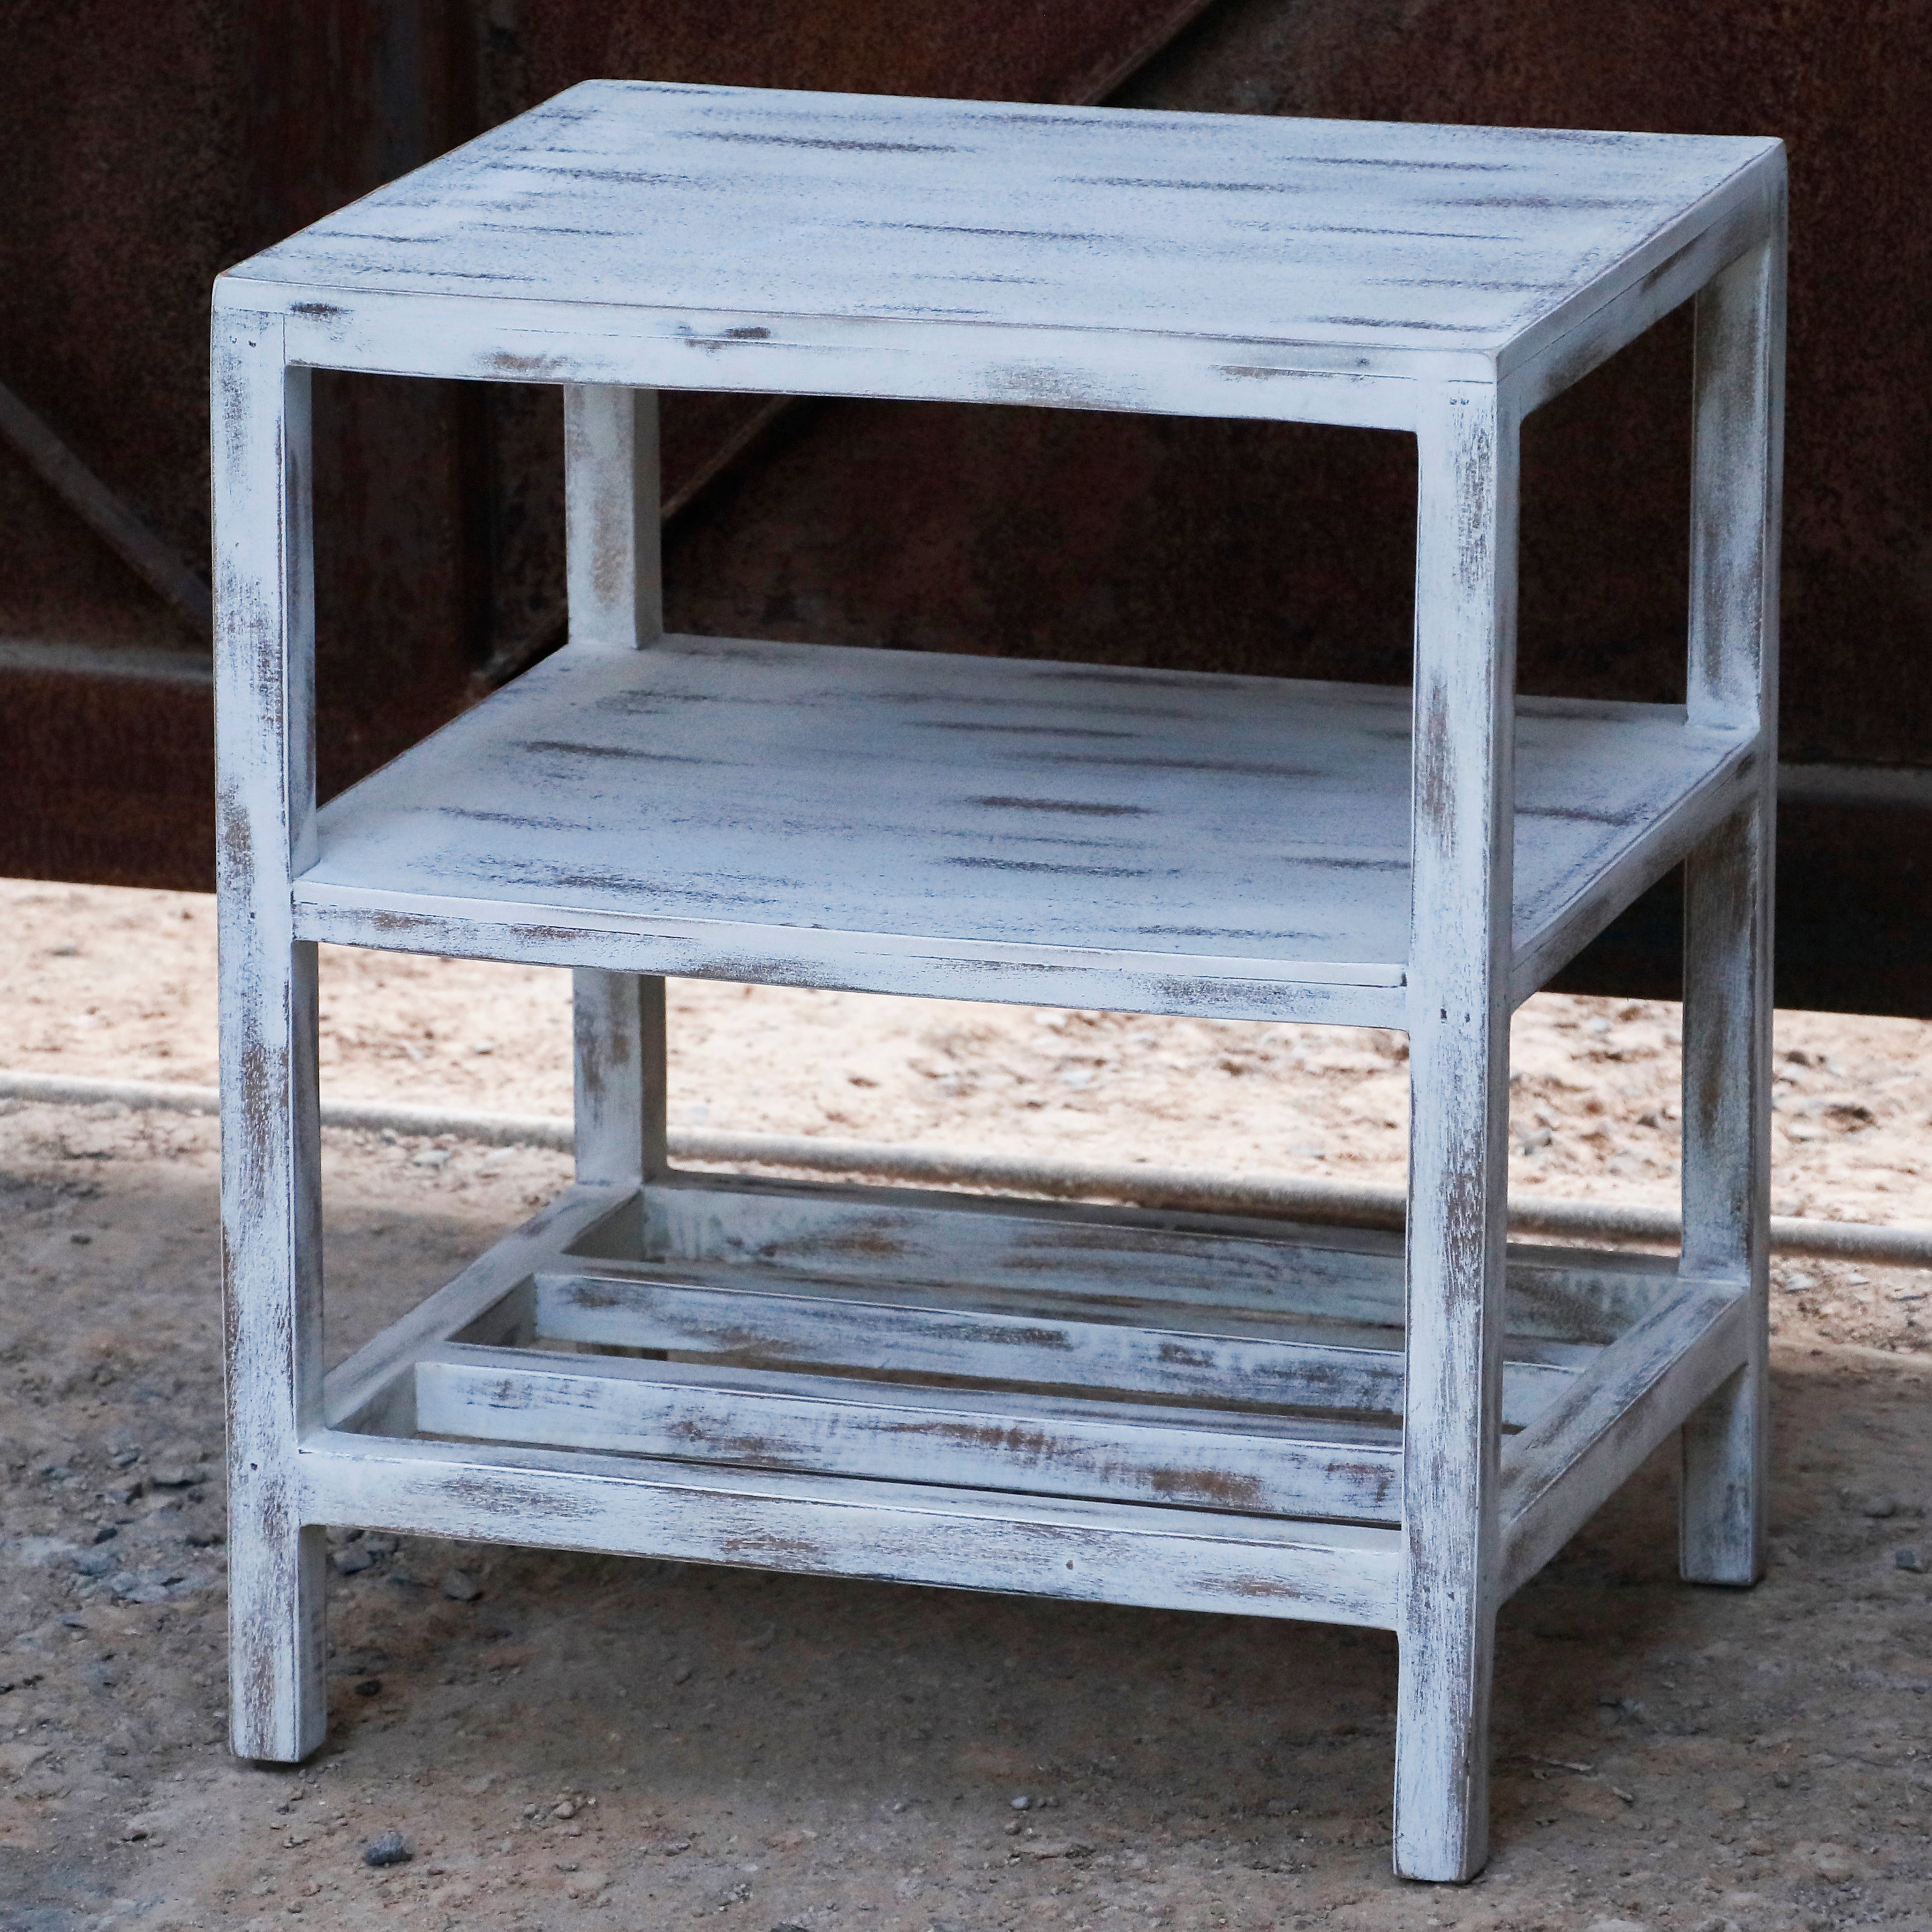 Elegant Premium White Distressed Handmade Accacia Wooden End Table for Home End Table